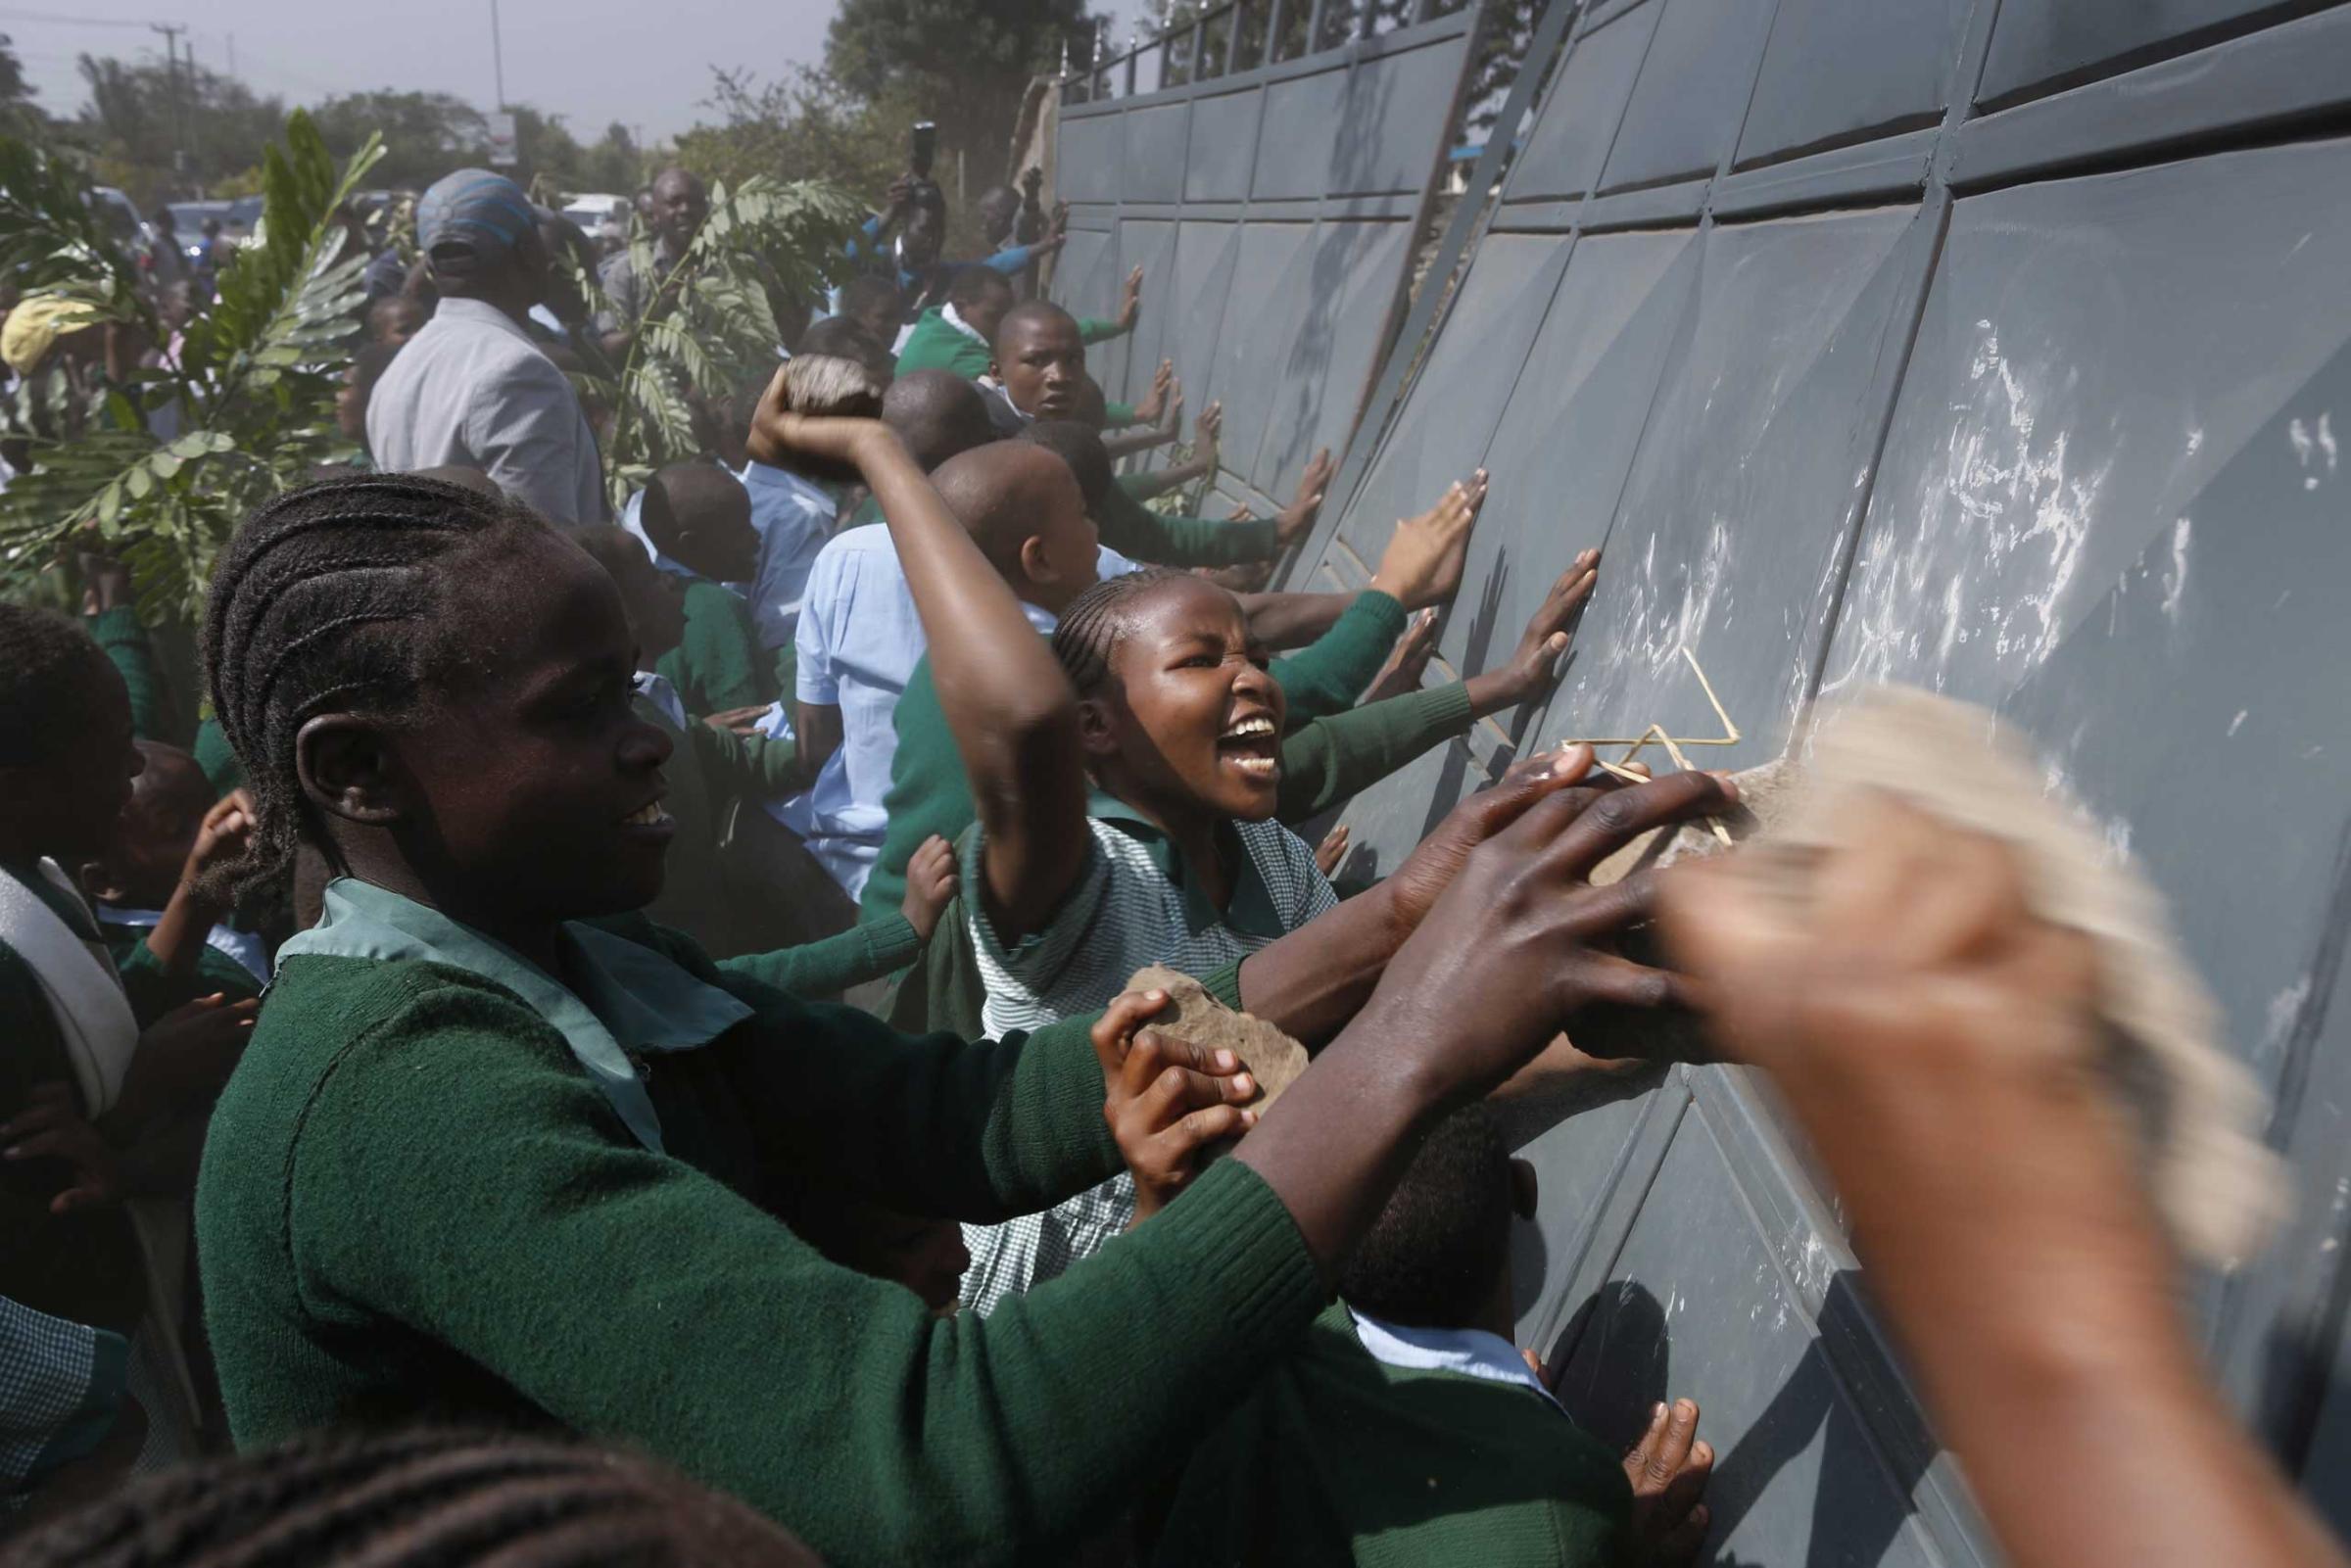 Police in Kenya fire teargas canisters at school children